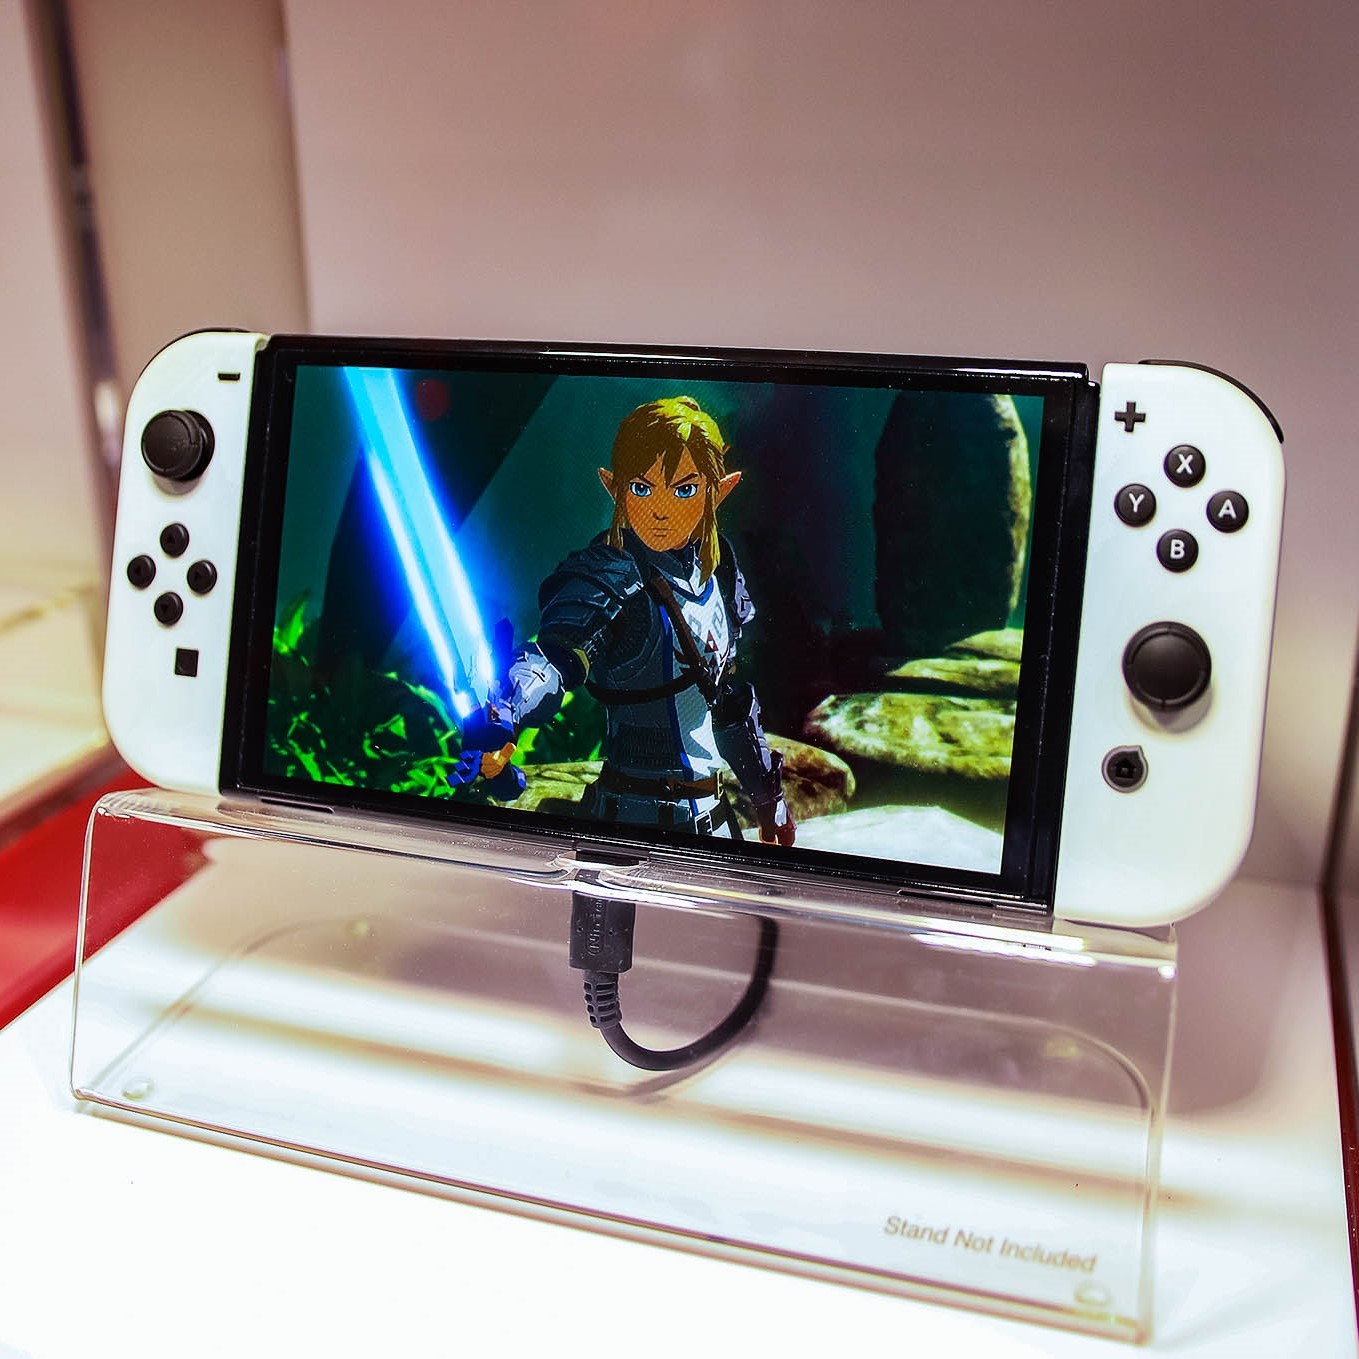 Modtager At placere Milliard Nintendo Switch OLED review: screentime - The Verge